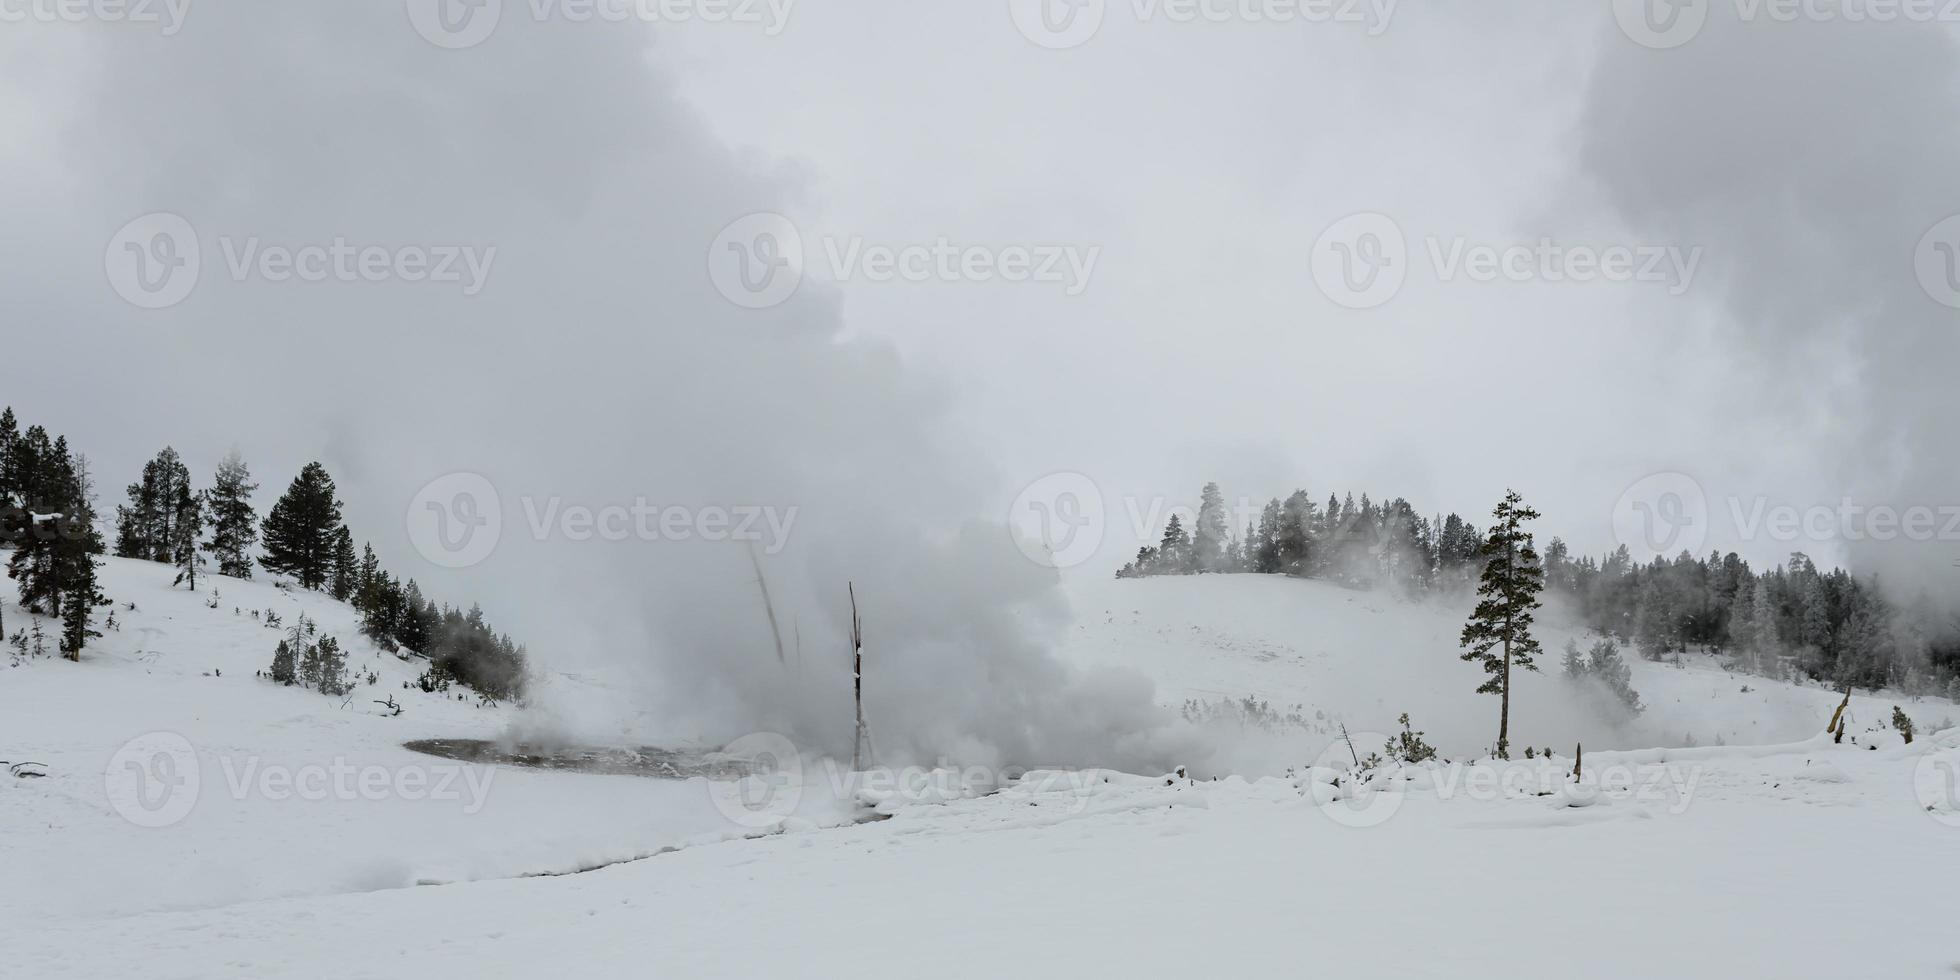 Winter landscapes of Yellowstone National Park in Wyoming photo